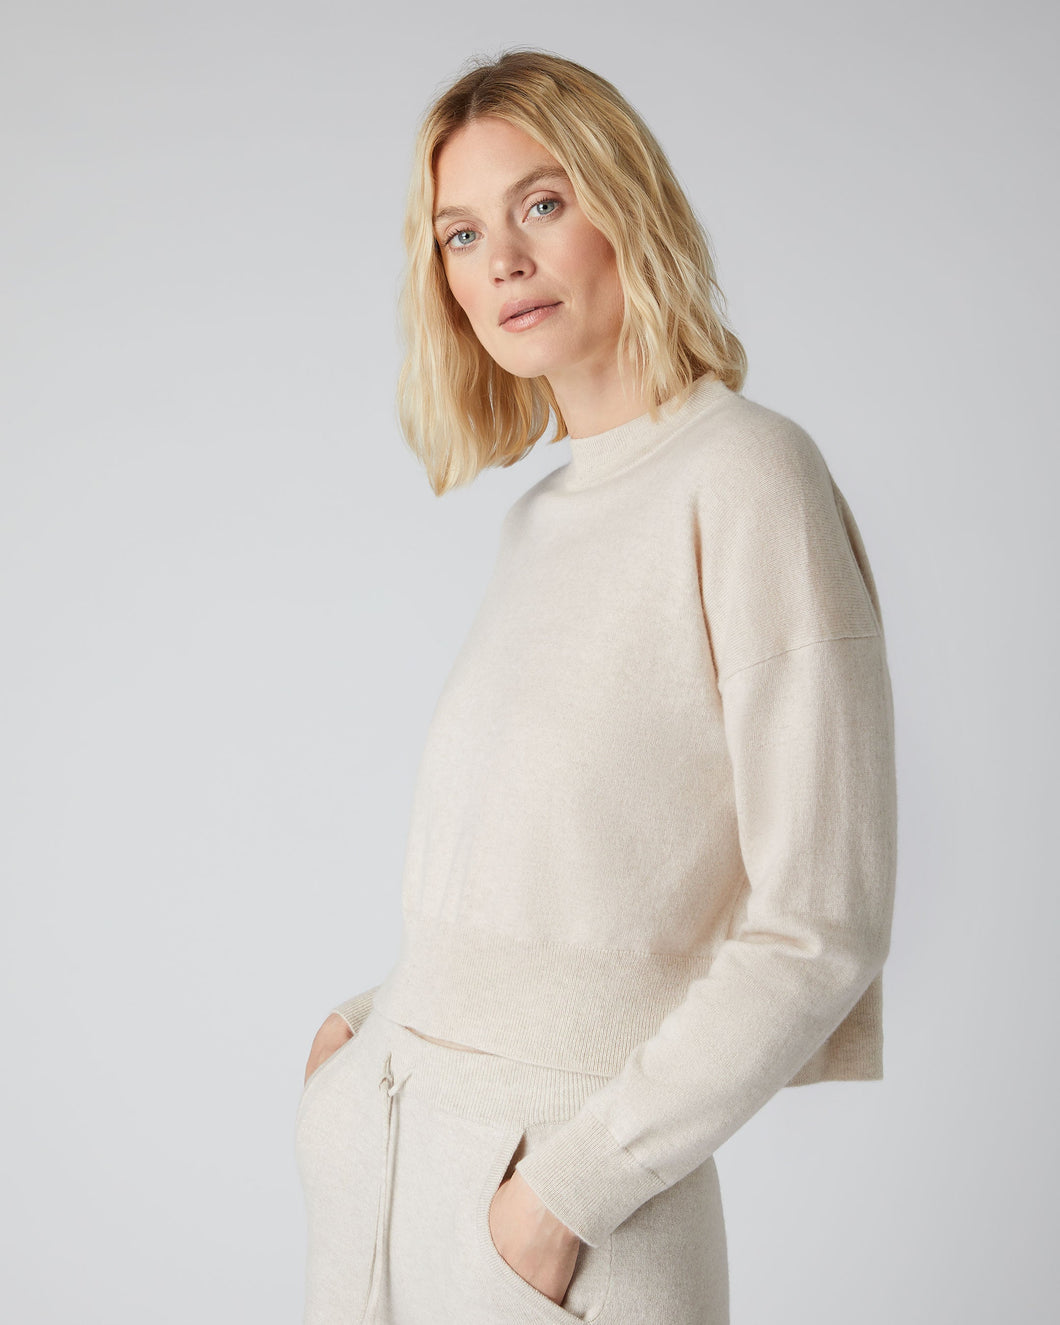 N.Peal Women's Relaxed Round Neck Cashmere Jumper Ecru White